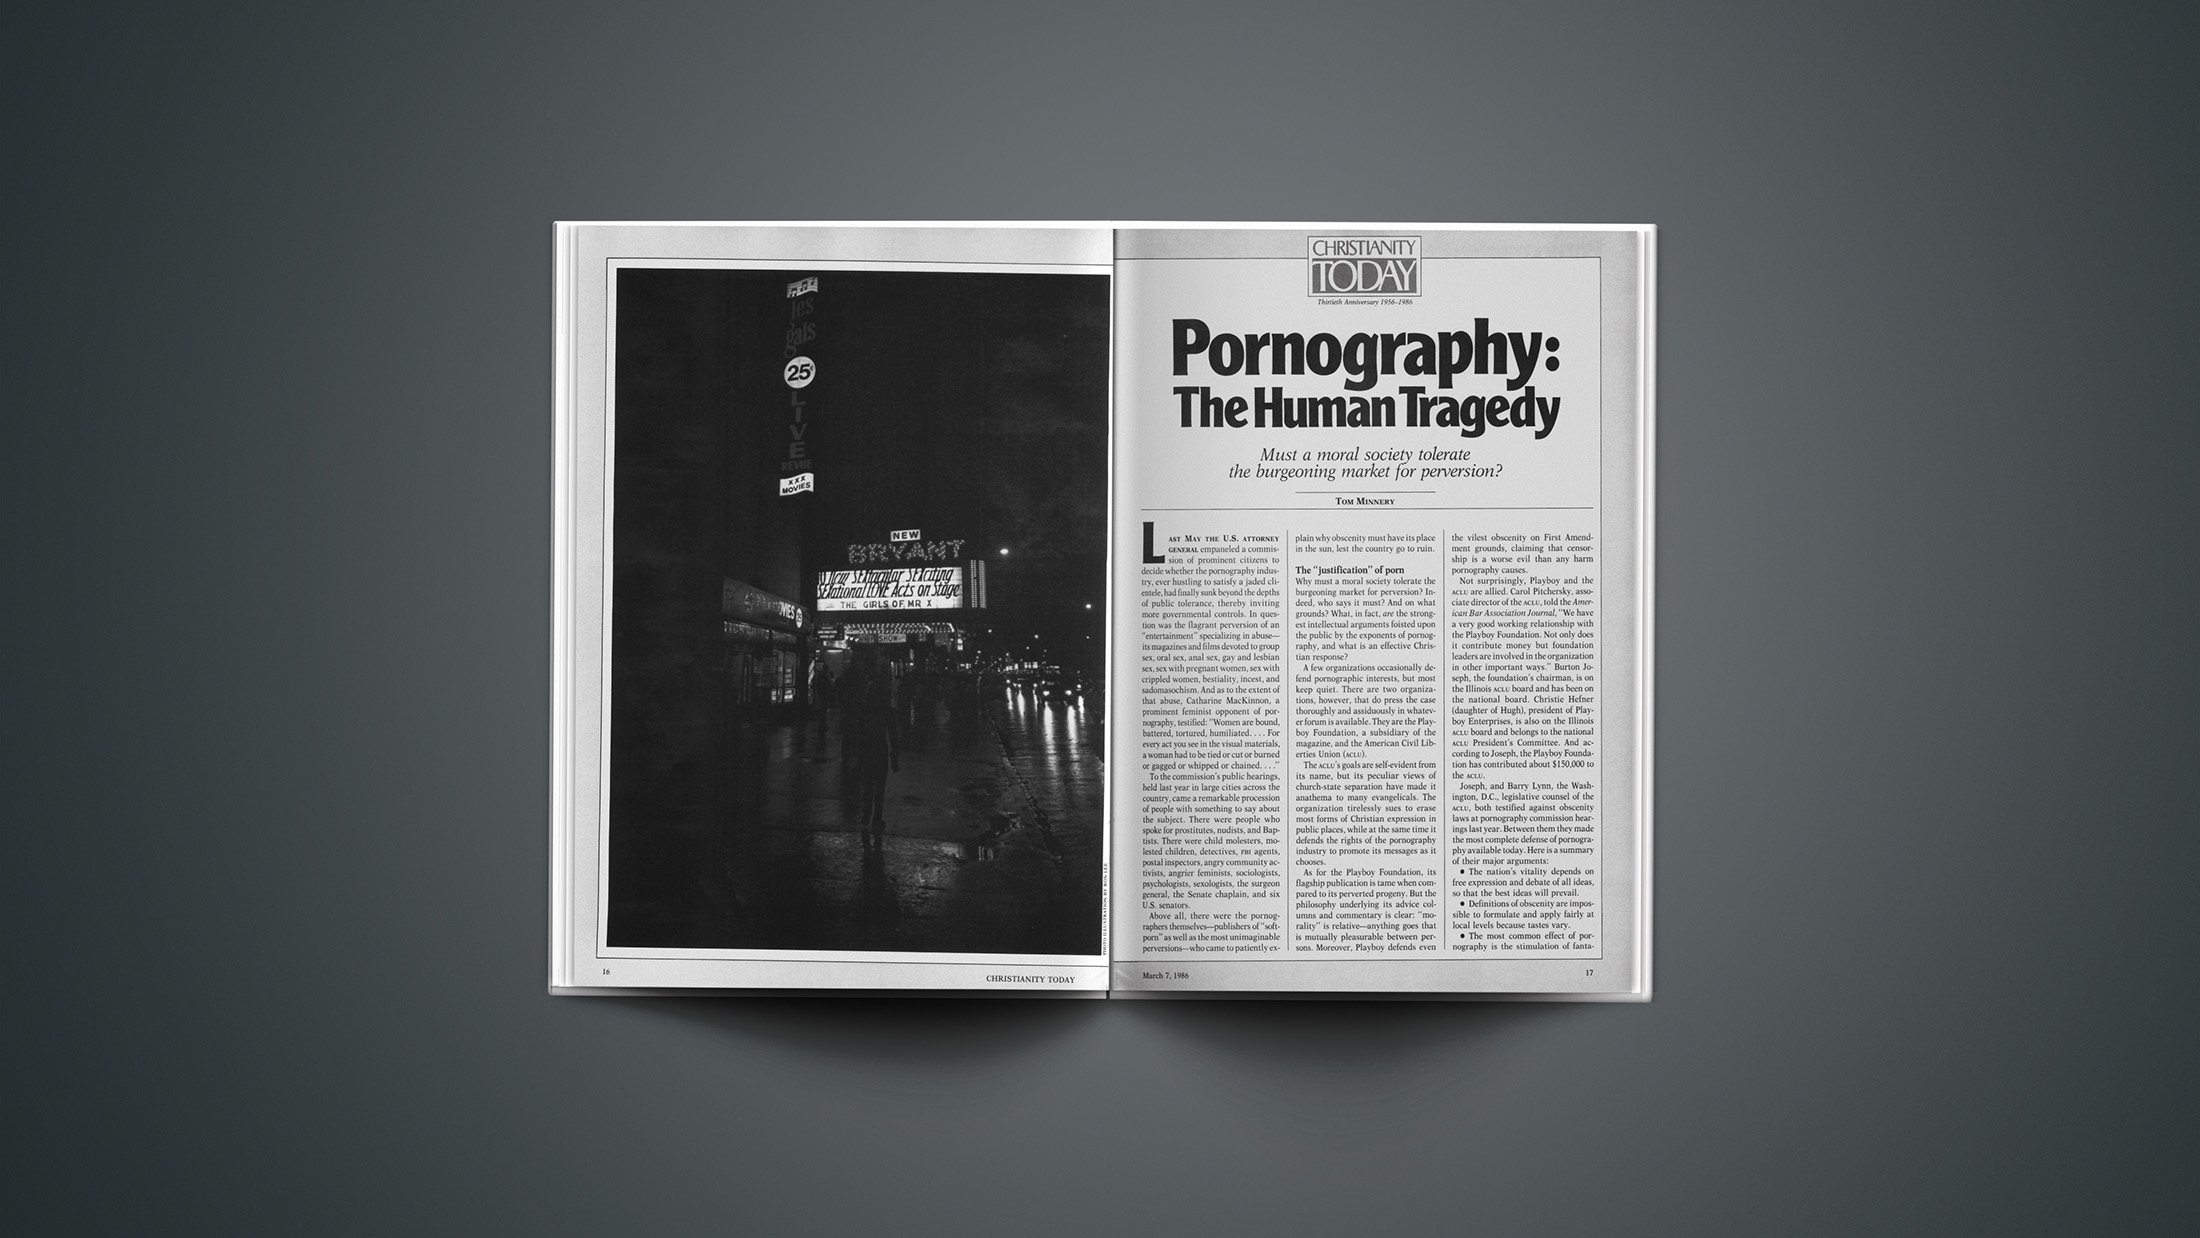 Pornography: The Human Tragedy | Christianity Today